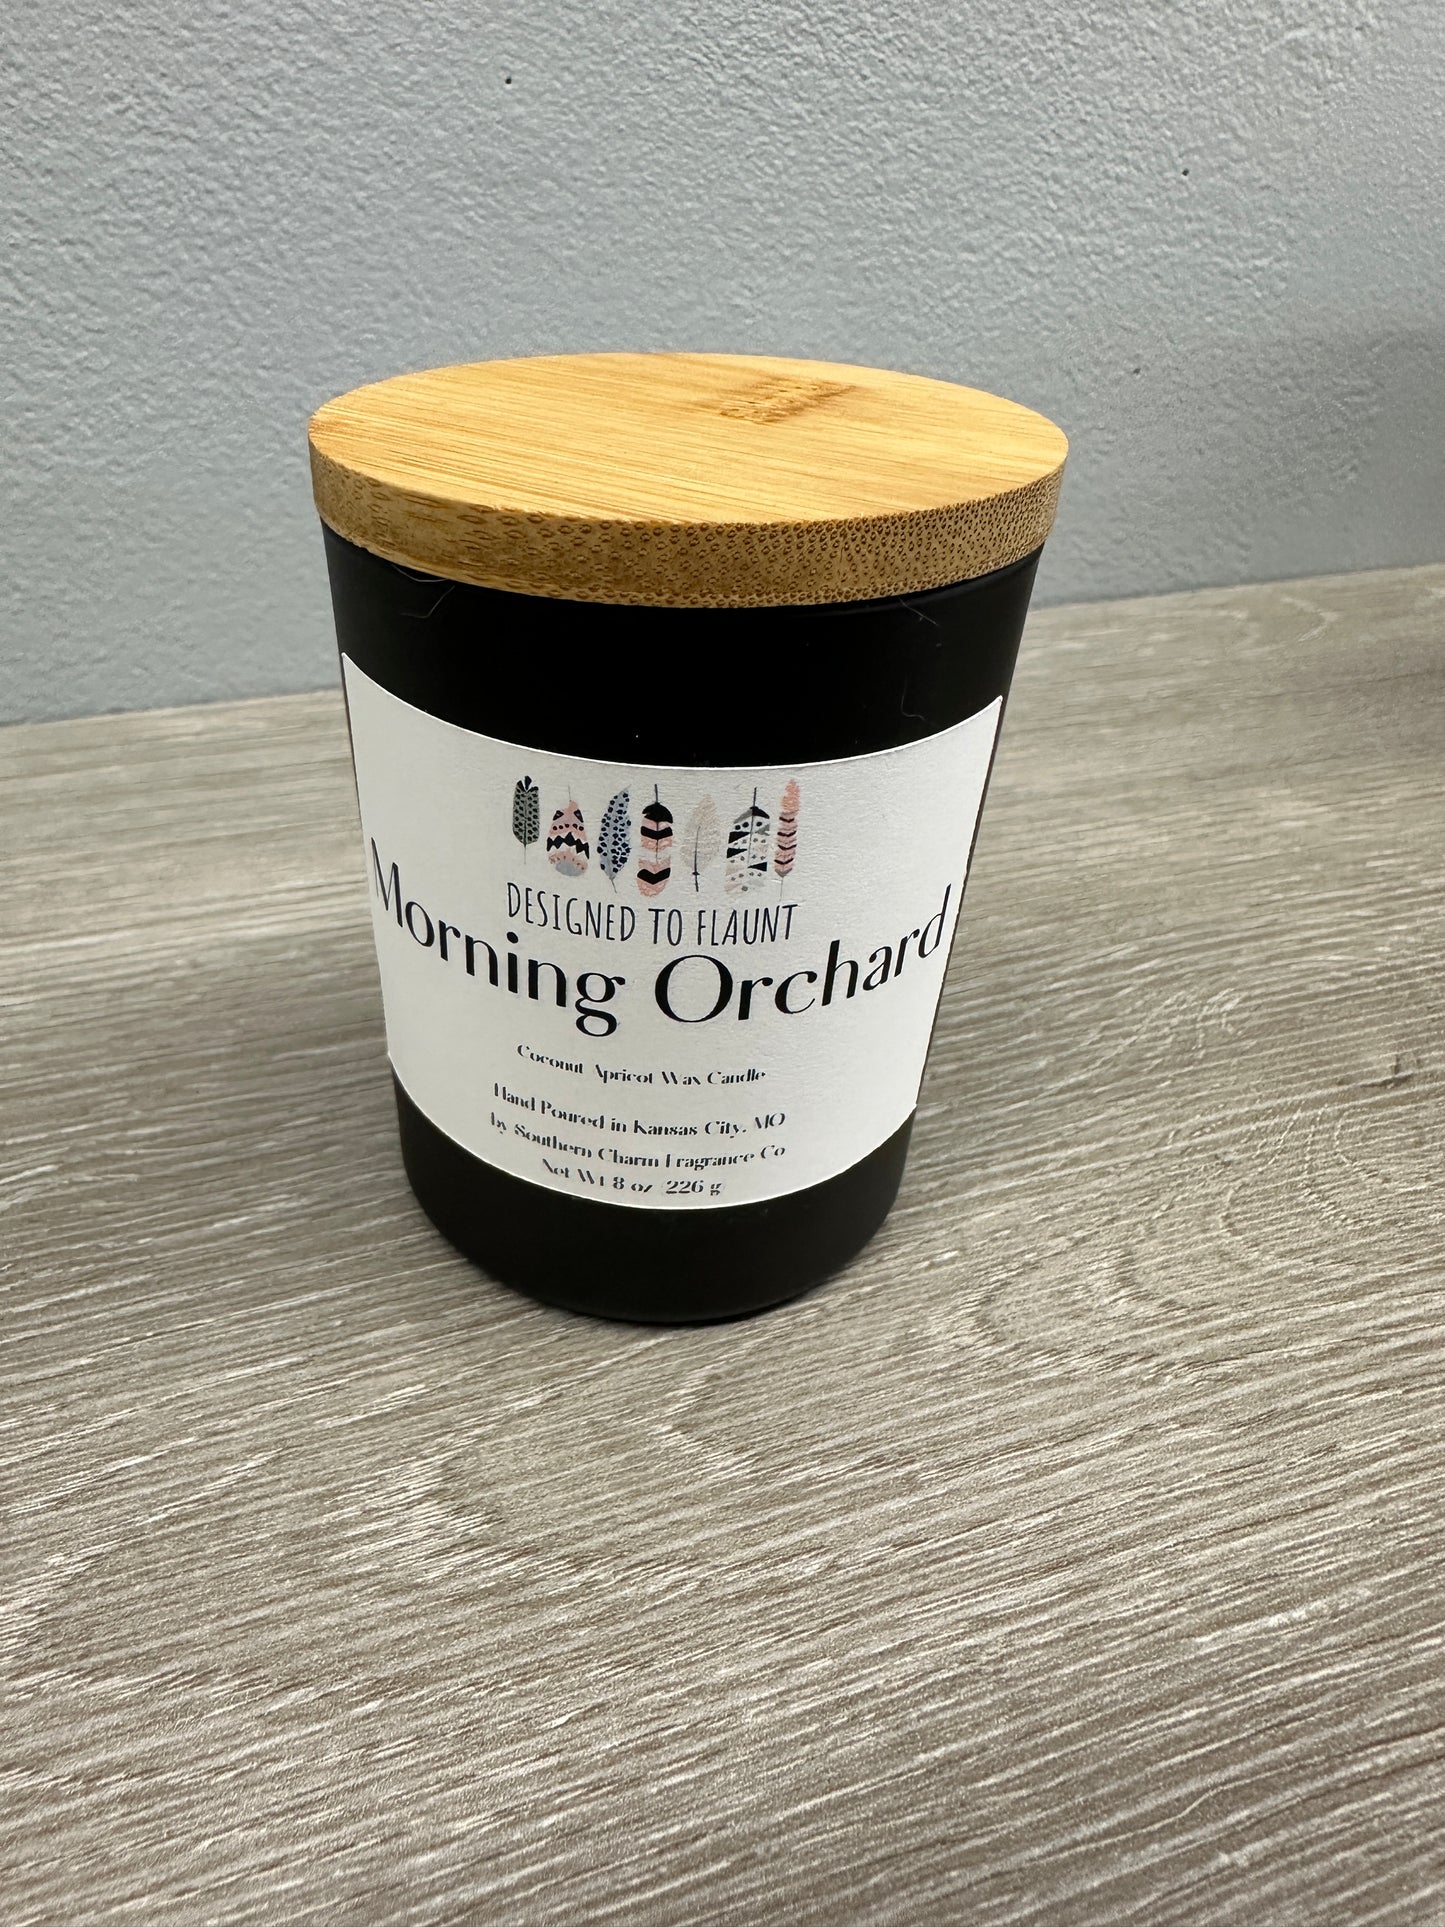 Morning Orchard Candle